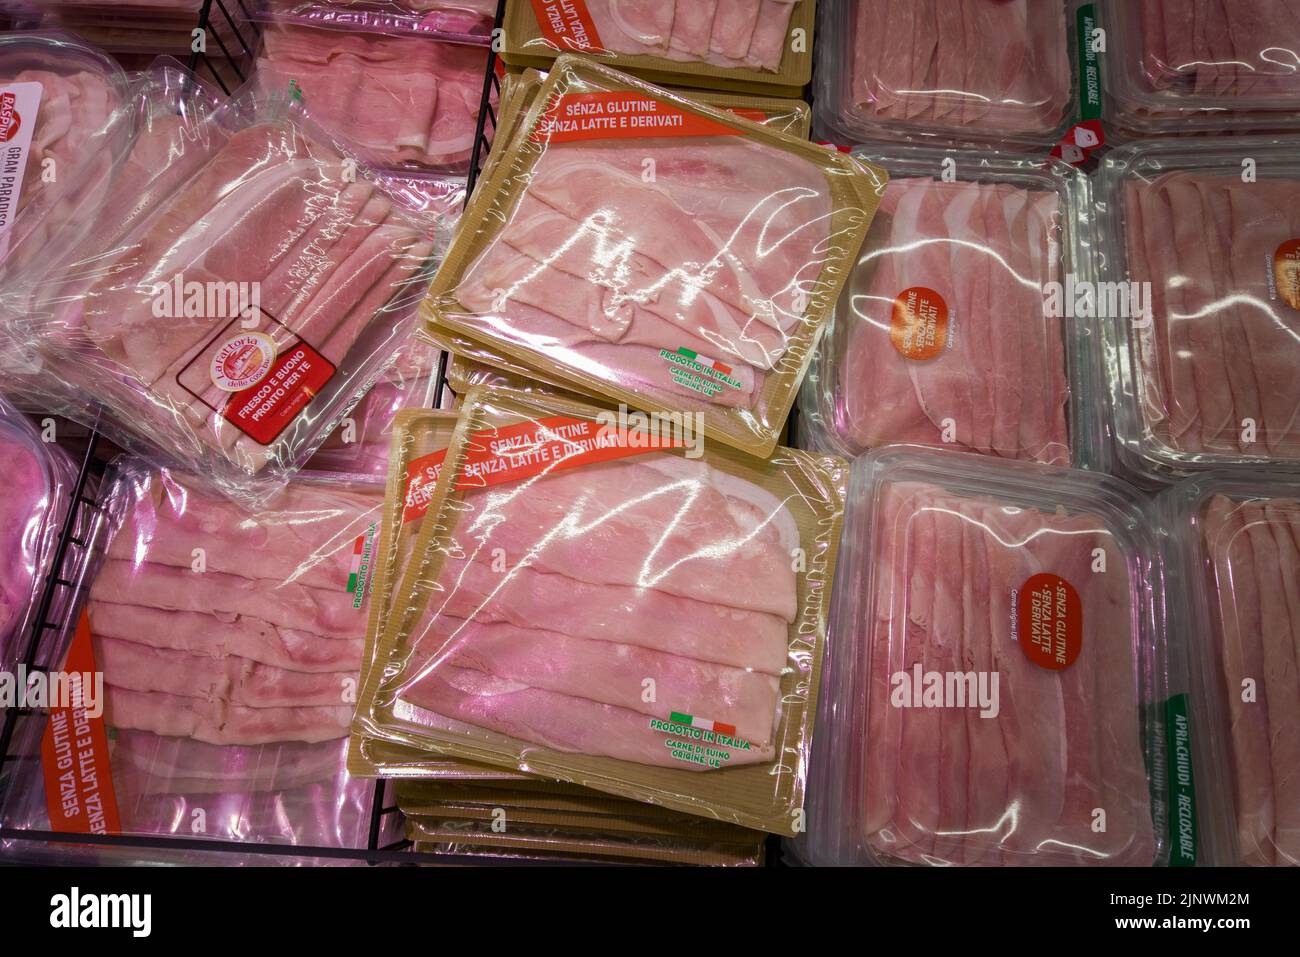 Fossano, Italy - August 11, 2022: packs of gluten-free cooked ham slices in the refrigerated counter of Italian supermarket. Tex:senza glutine senza l Stock Photo